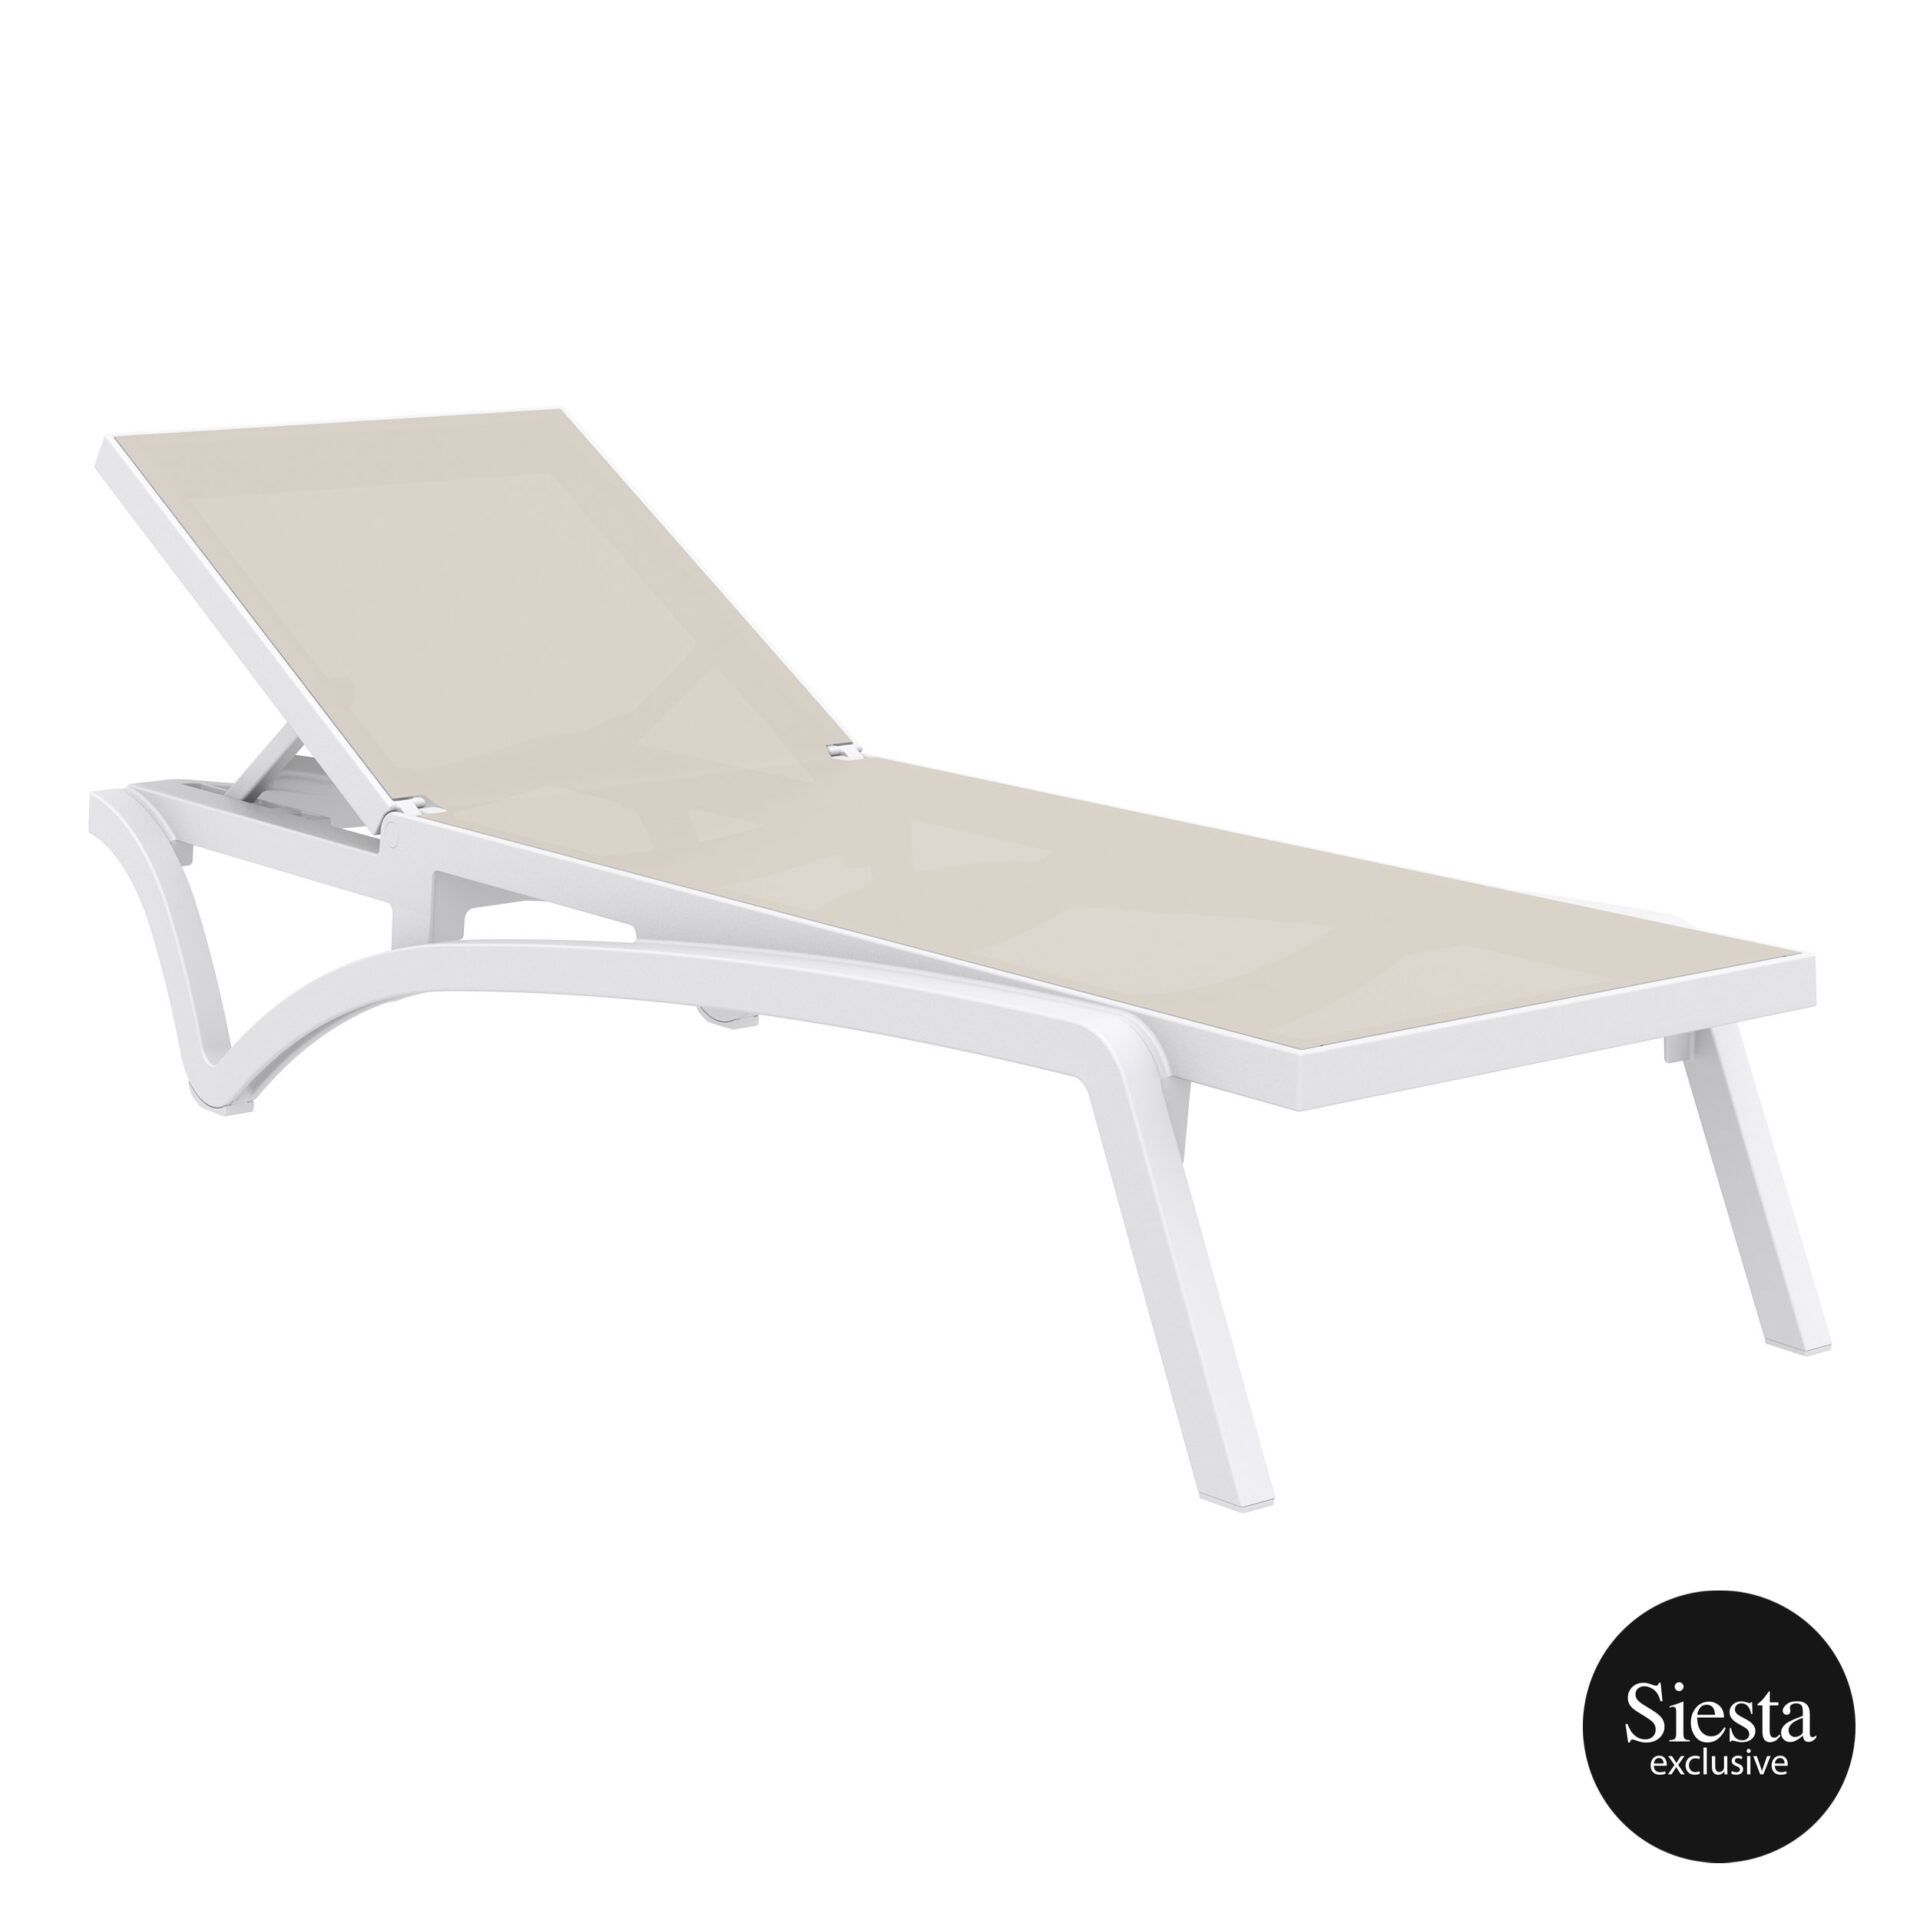 pool deck commercial pacific sunlounger white dovegrey front side